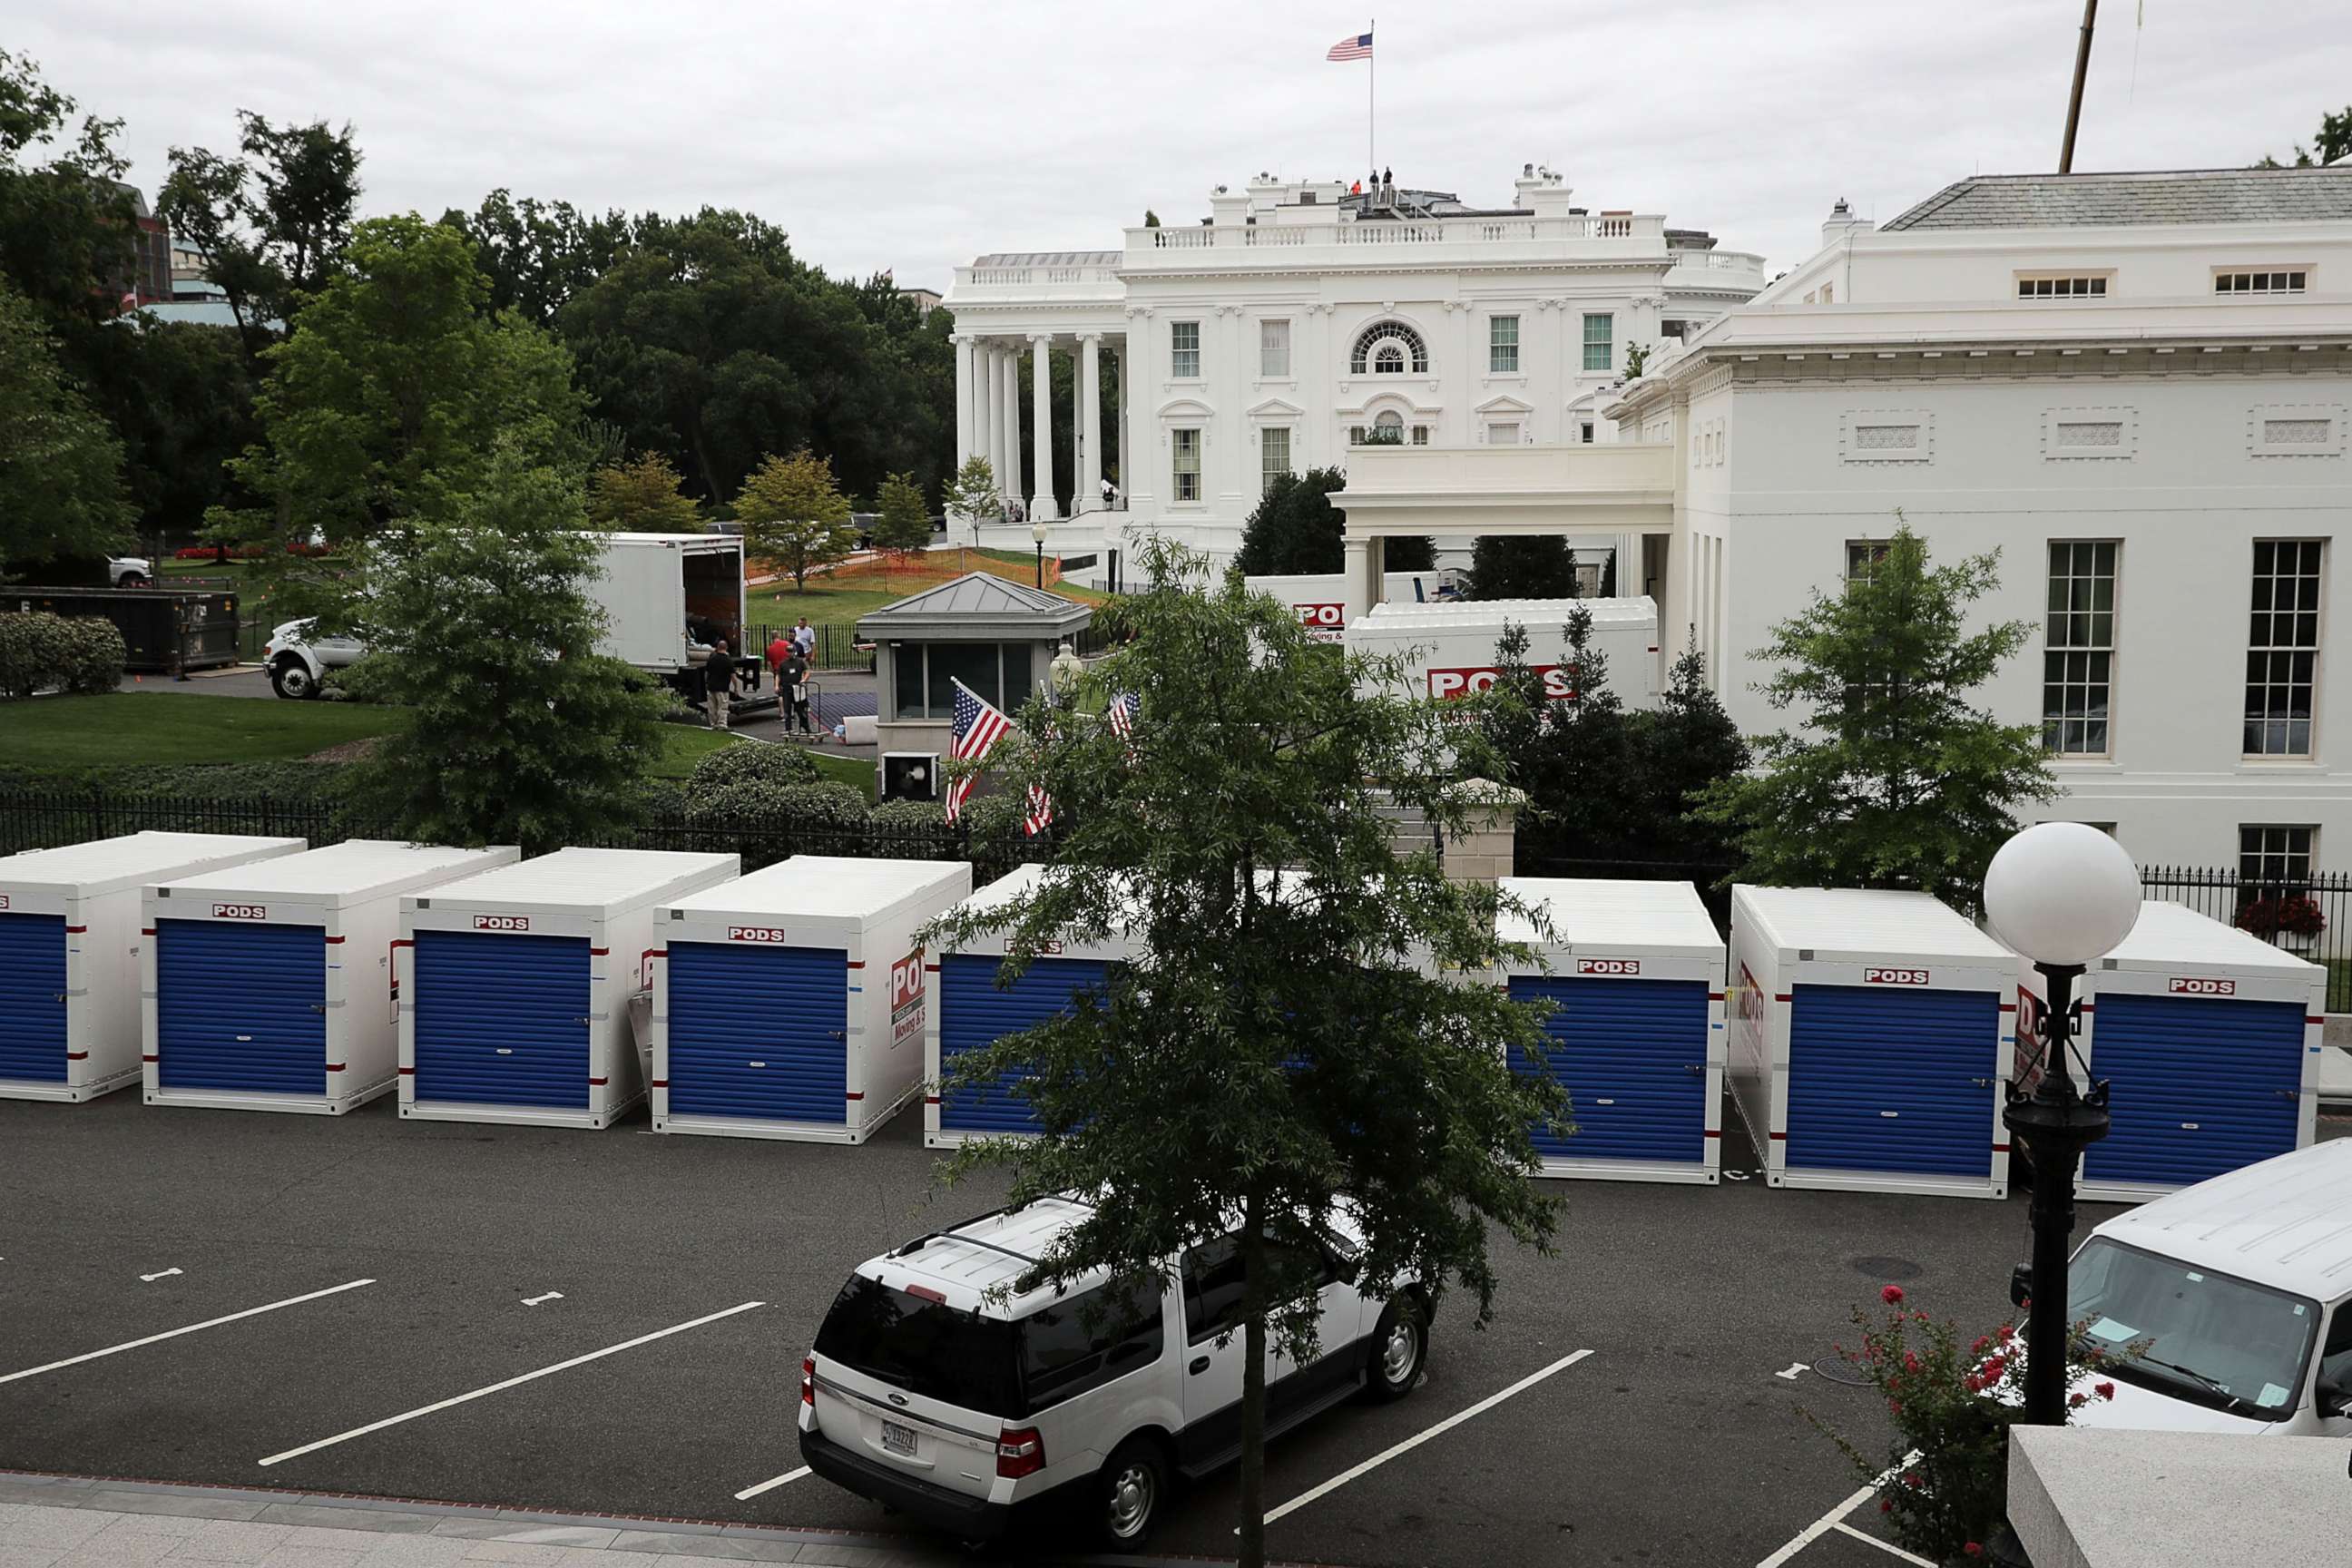 PHOTO: Furniture and materials from the White House are stored in temporary containers outside the West Wing while remodeling work continues August 11, 2017 in Washington, DC.